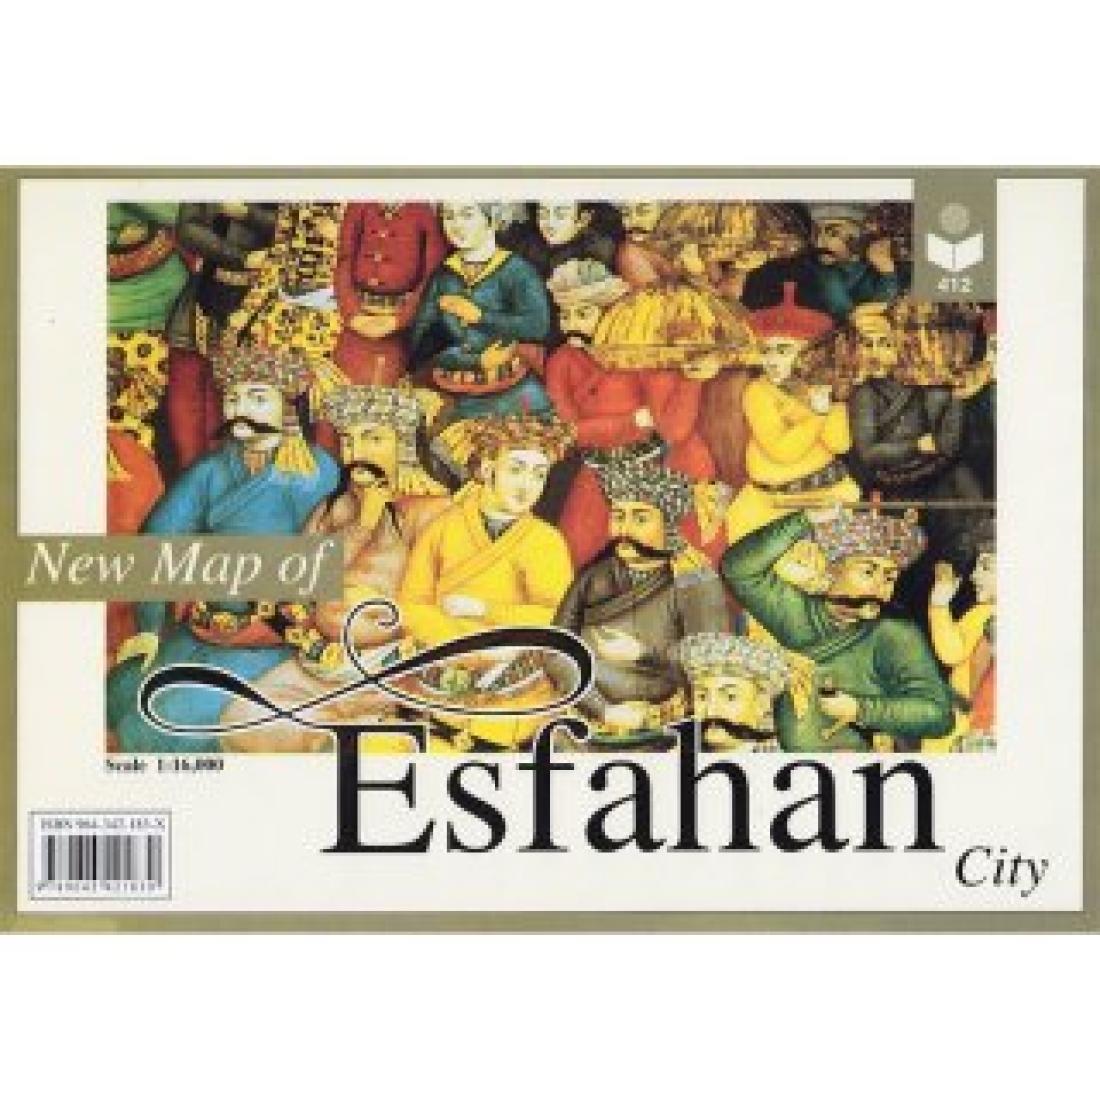 New map of Esfahan city